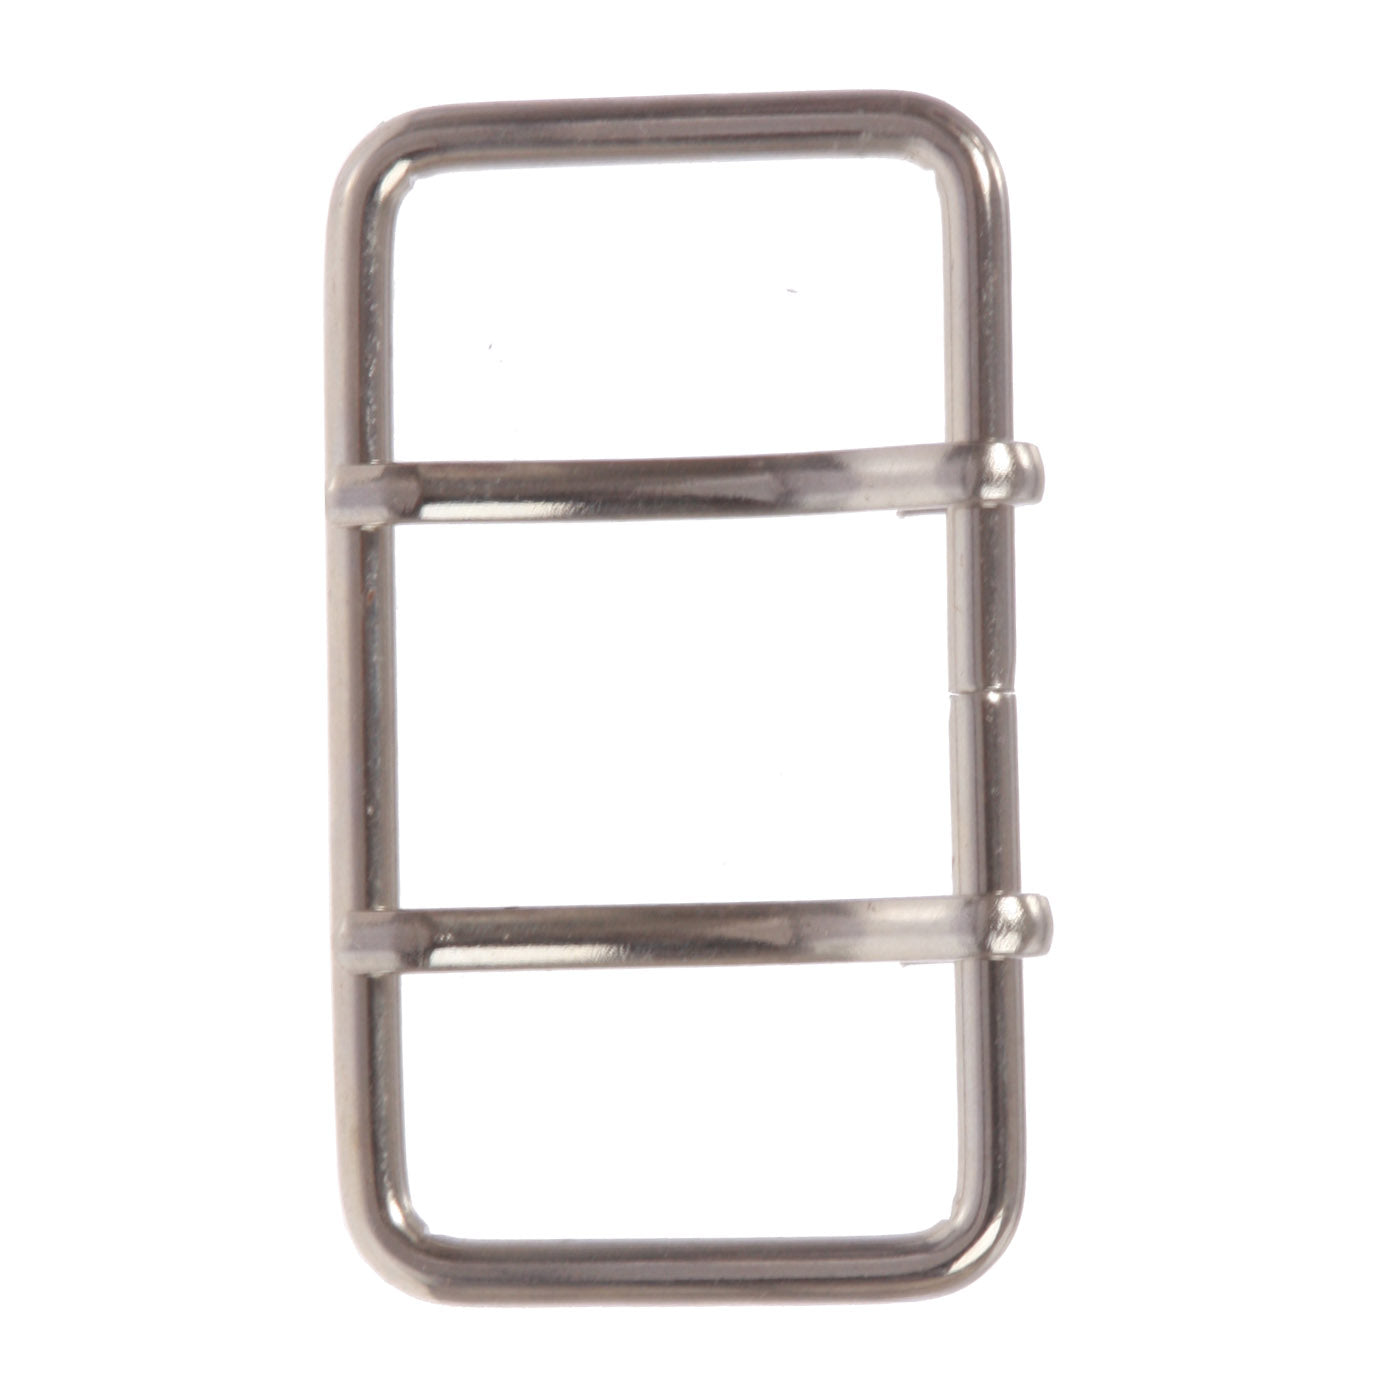 3" Double Prong Rectangle Belt Buckle for Replacement